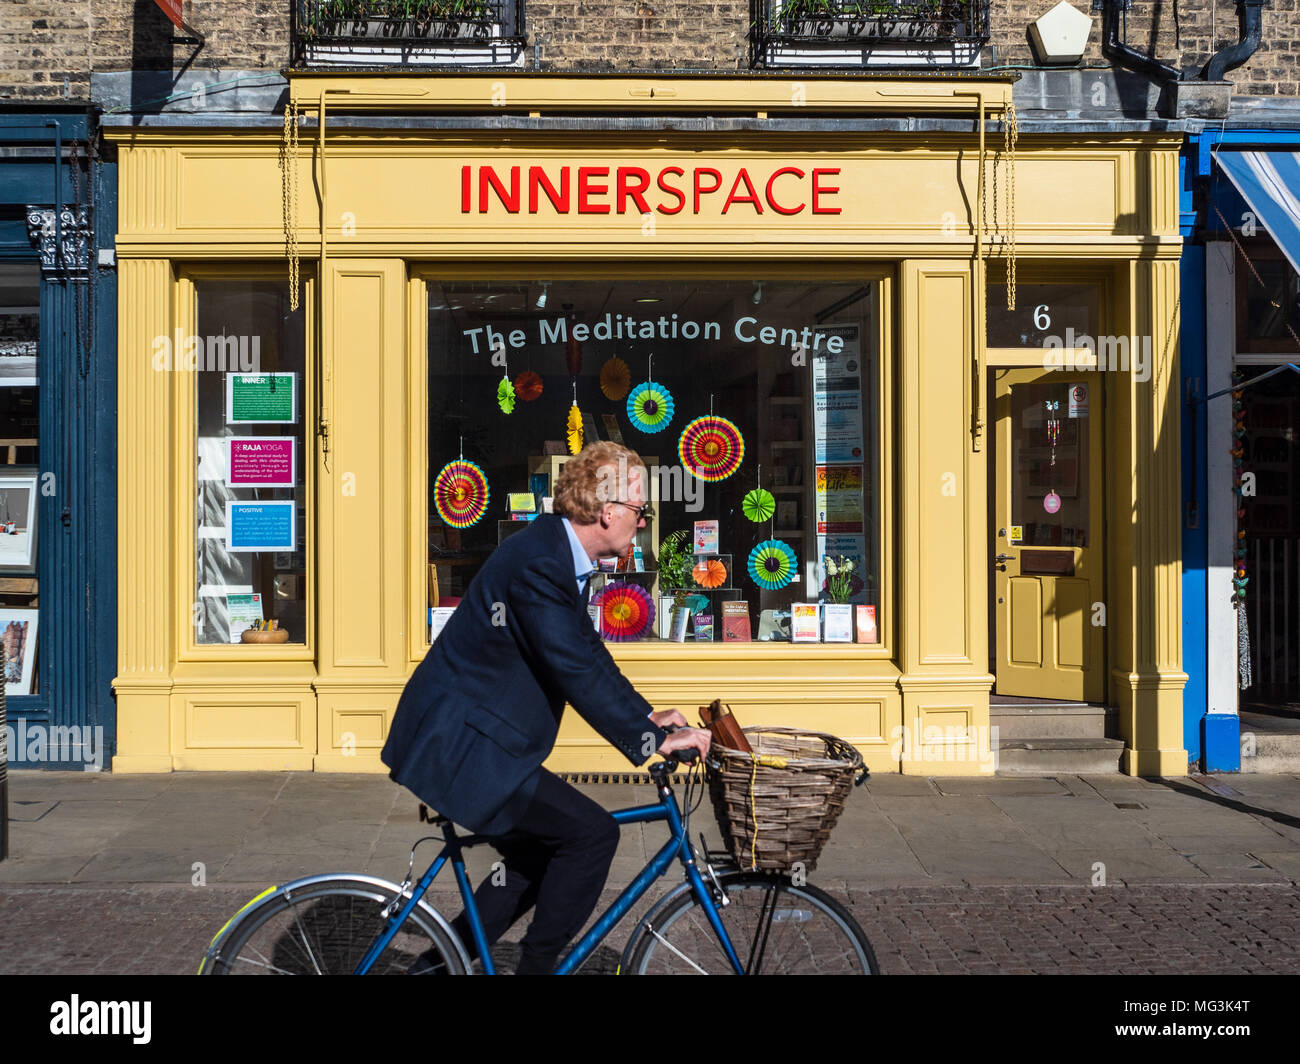 Meditation Centre - a commuter cycles past the Innerspace Meditation Centre in Cambridge UK. Innerspace is an initiative of the Brahma Kumaris. Stock Photo